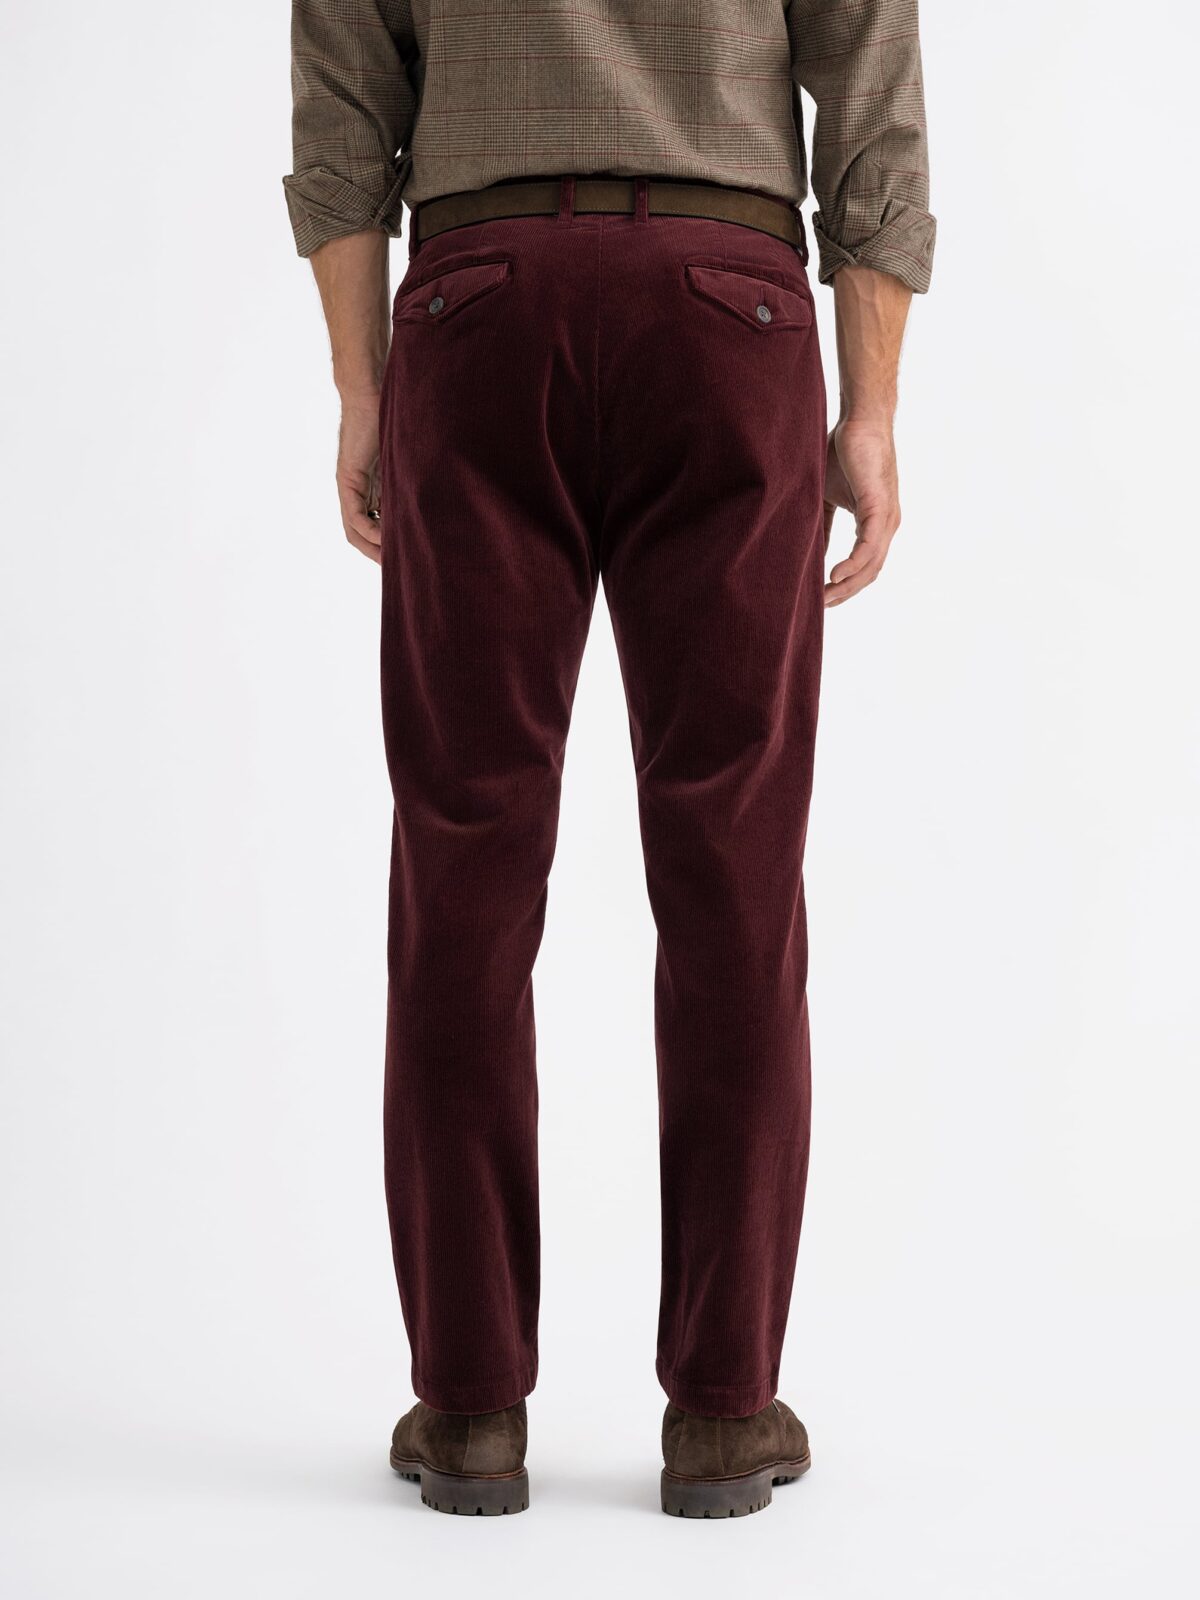 Corduroy Trousers for Women - Autumn Winter Wine Red Middle Aged